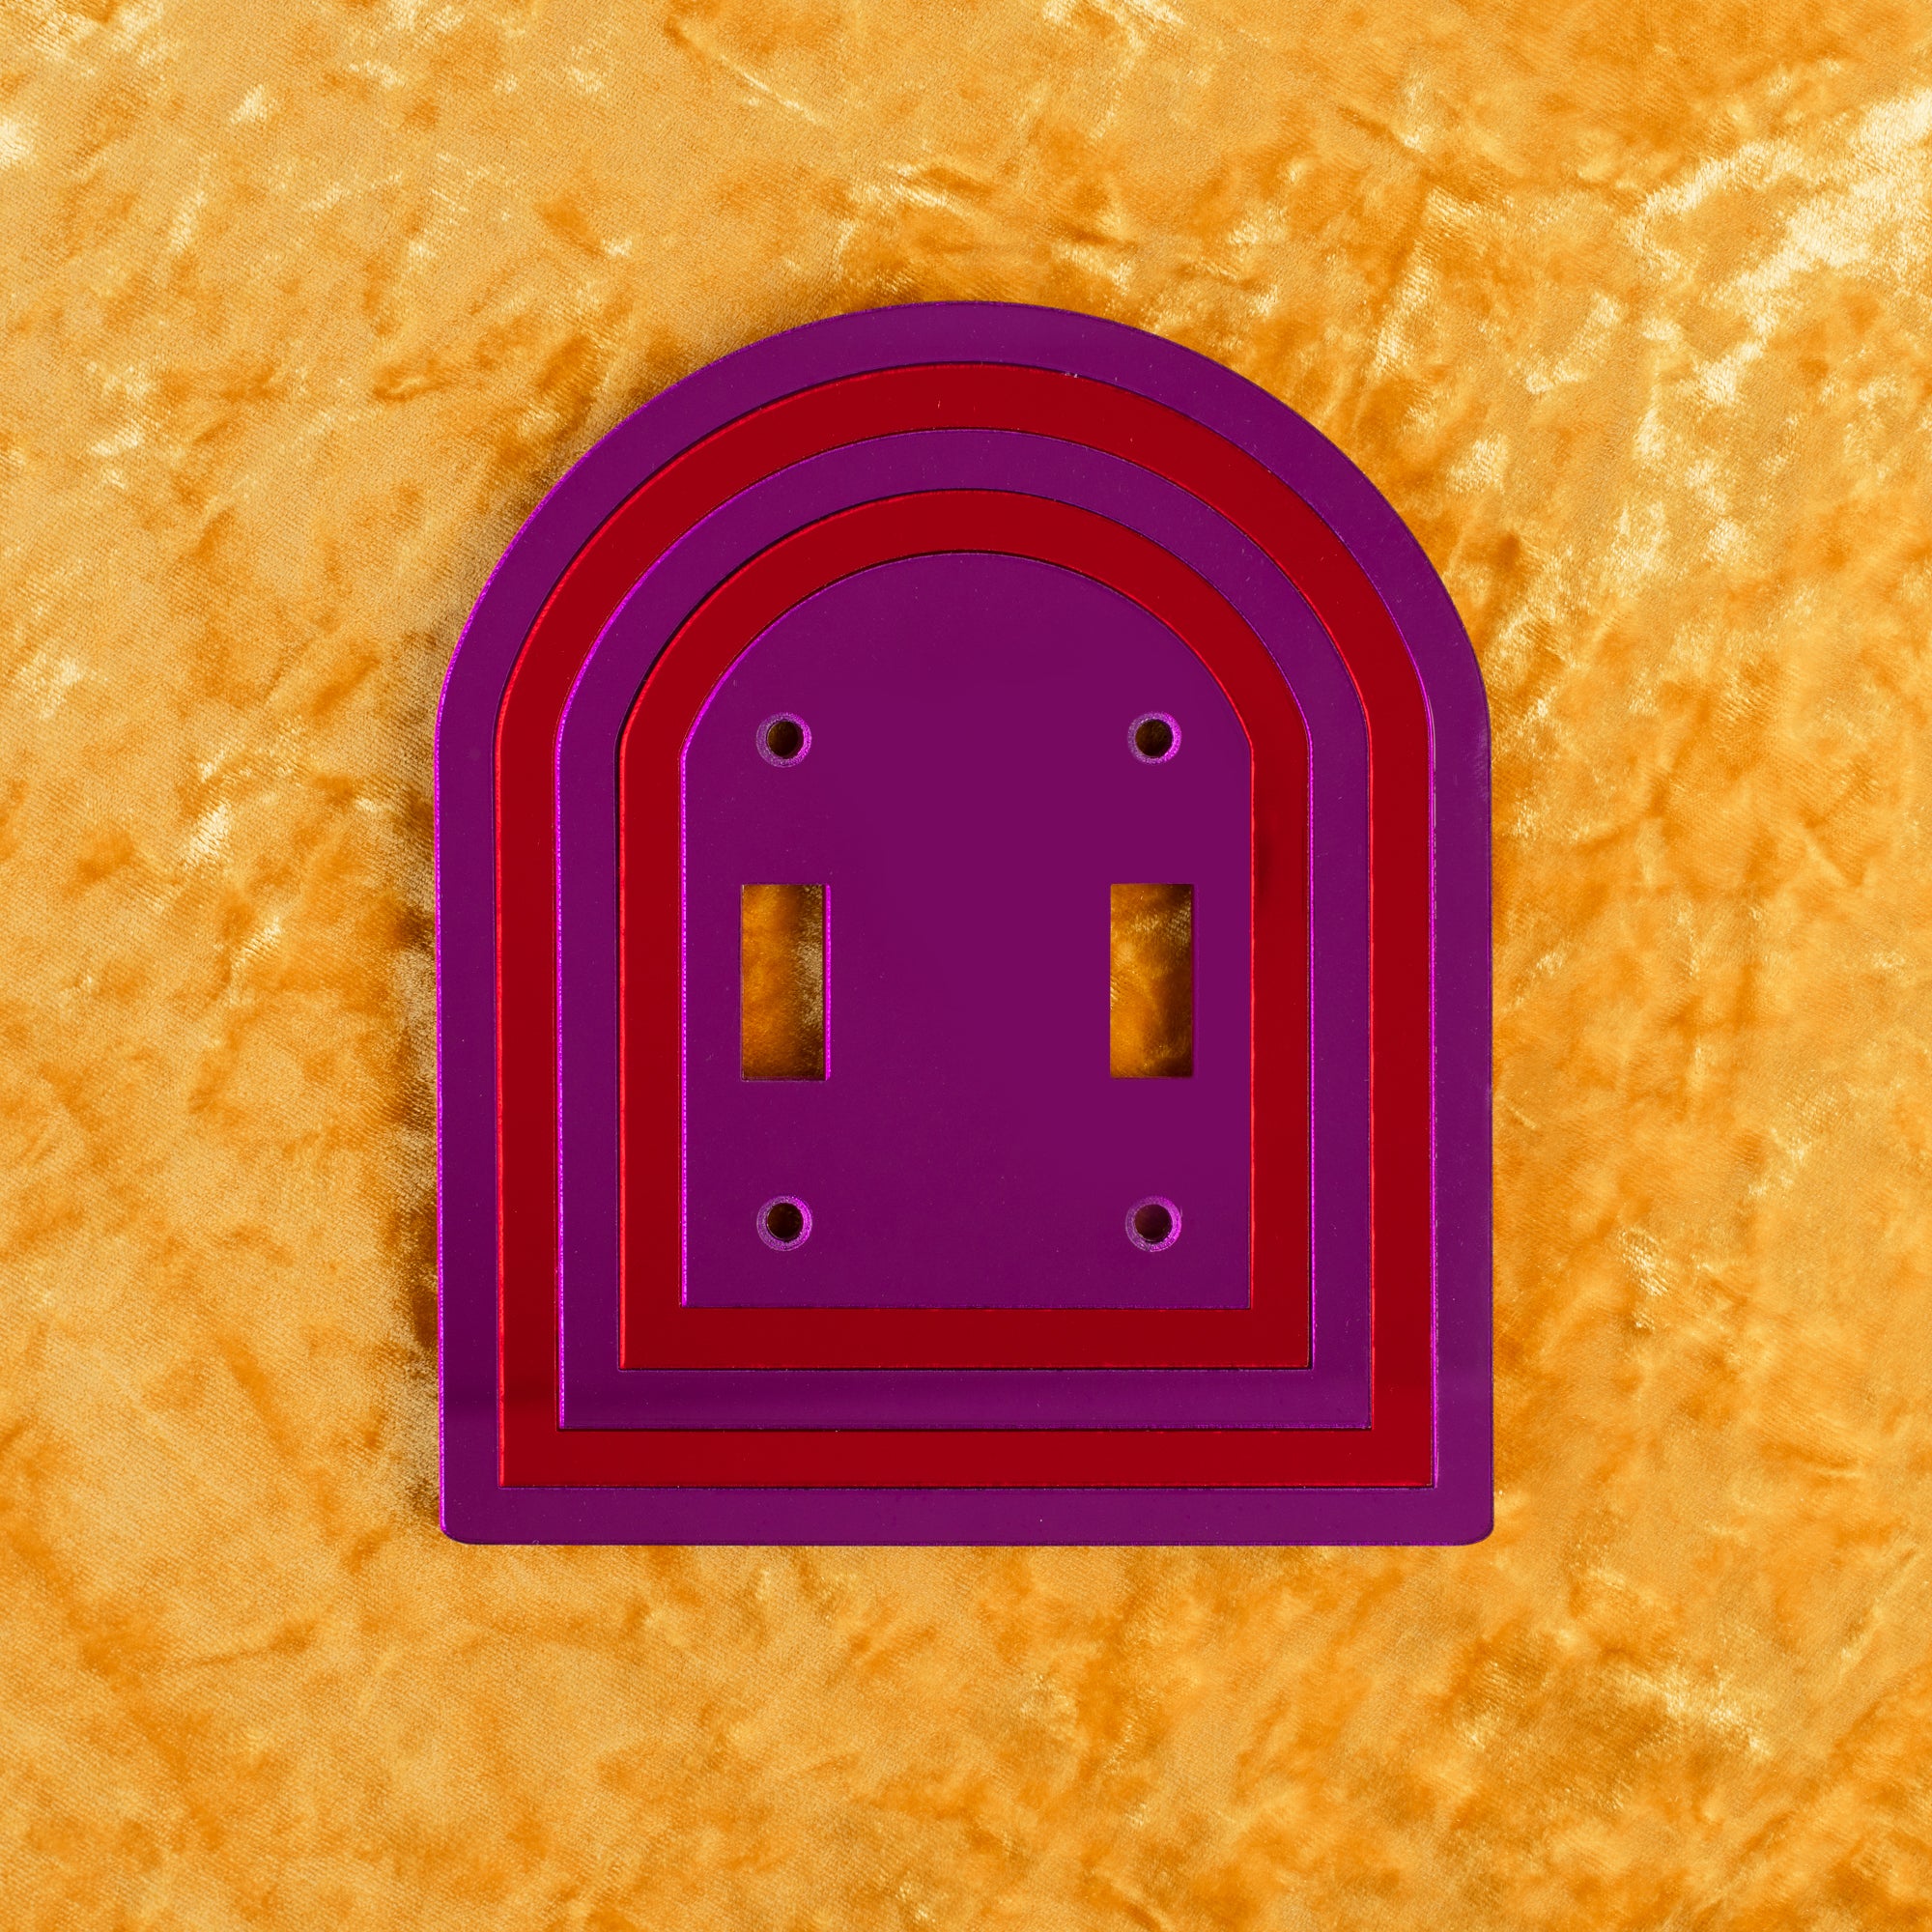 MindFlowers: The Archway Light Switch Cover